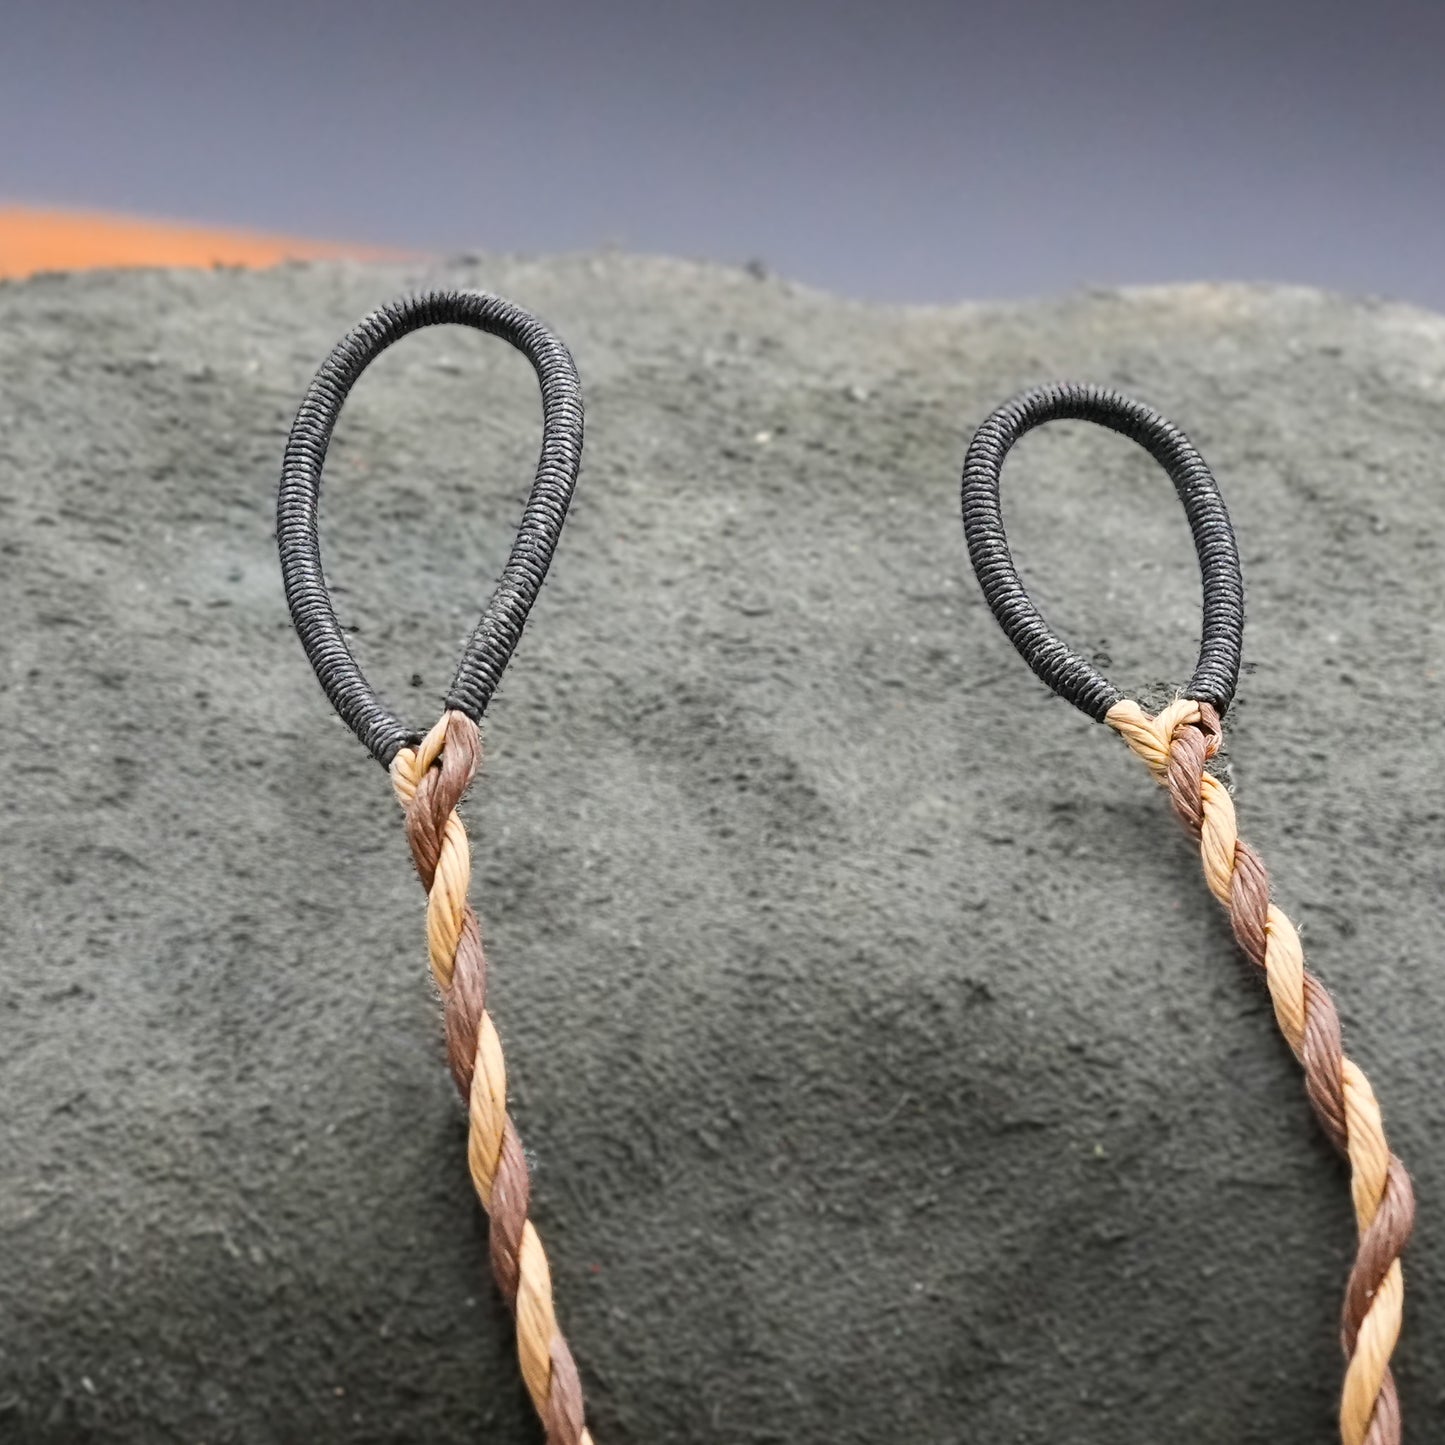 The Invincible Flemish Twist Bowstring